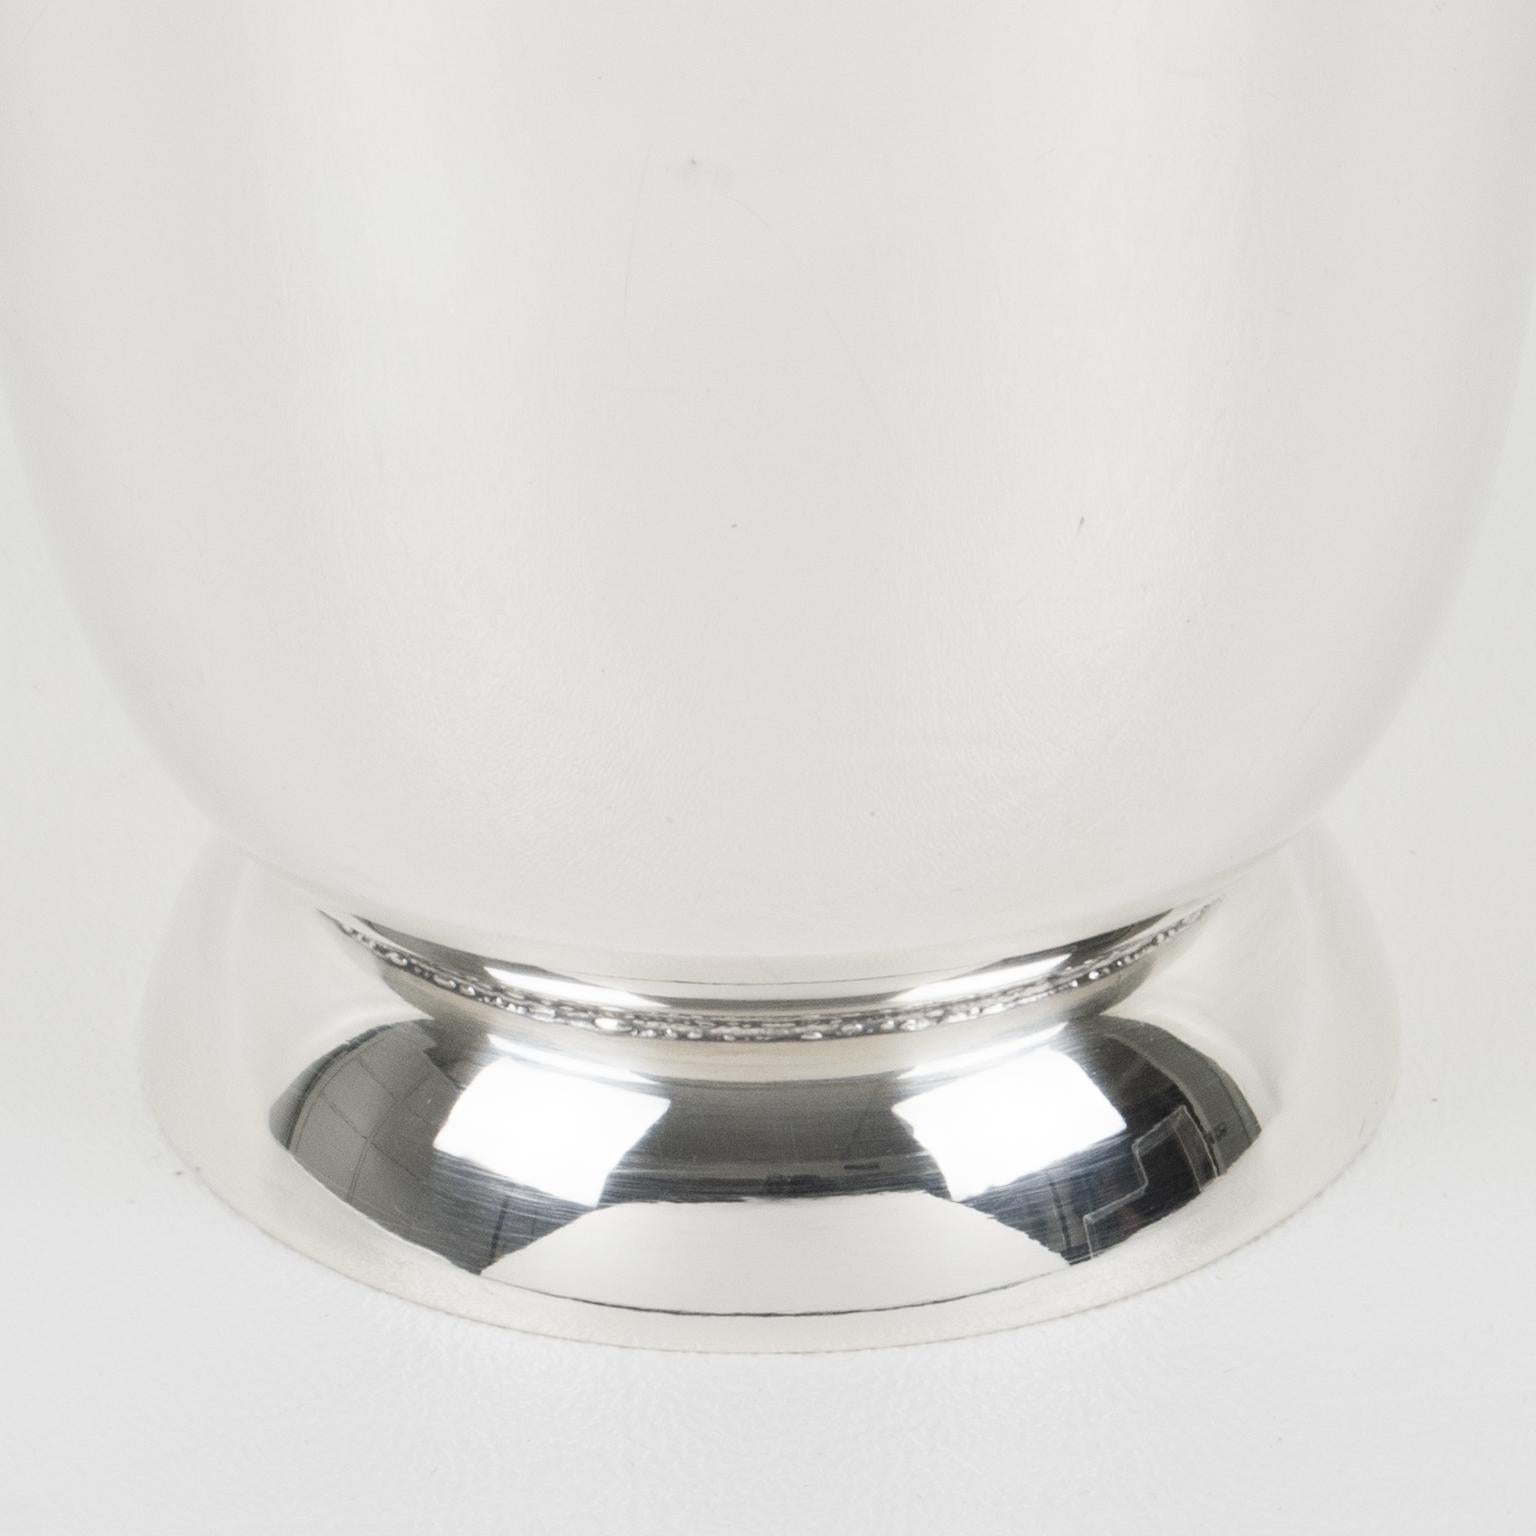 Mid-20th Century Art Deco Silver Plate Cocktail Shaker by Gallia France